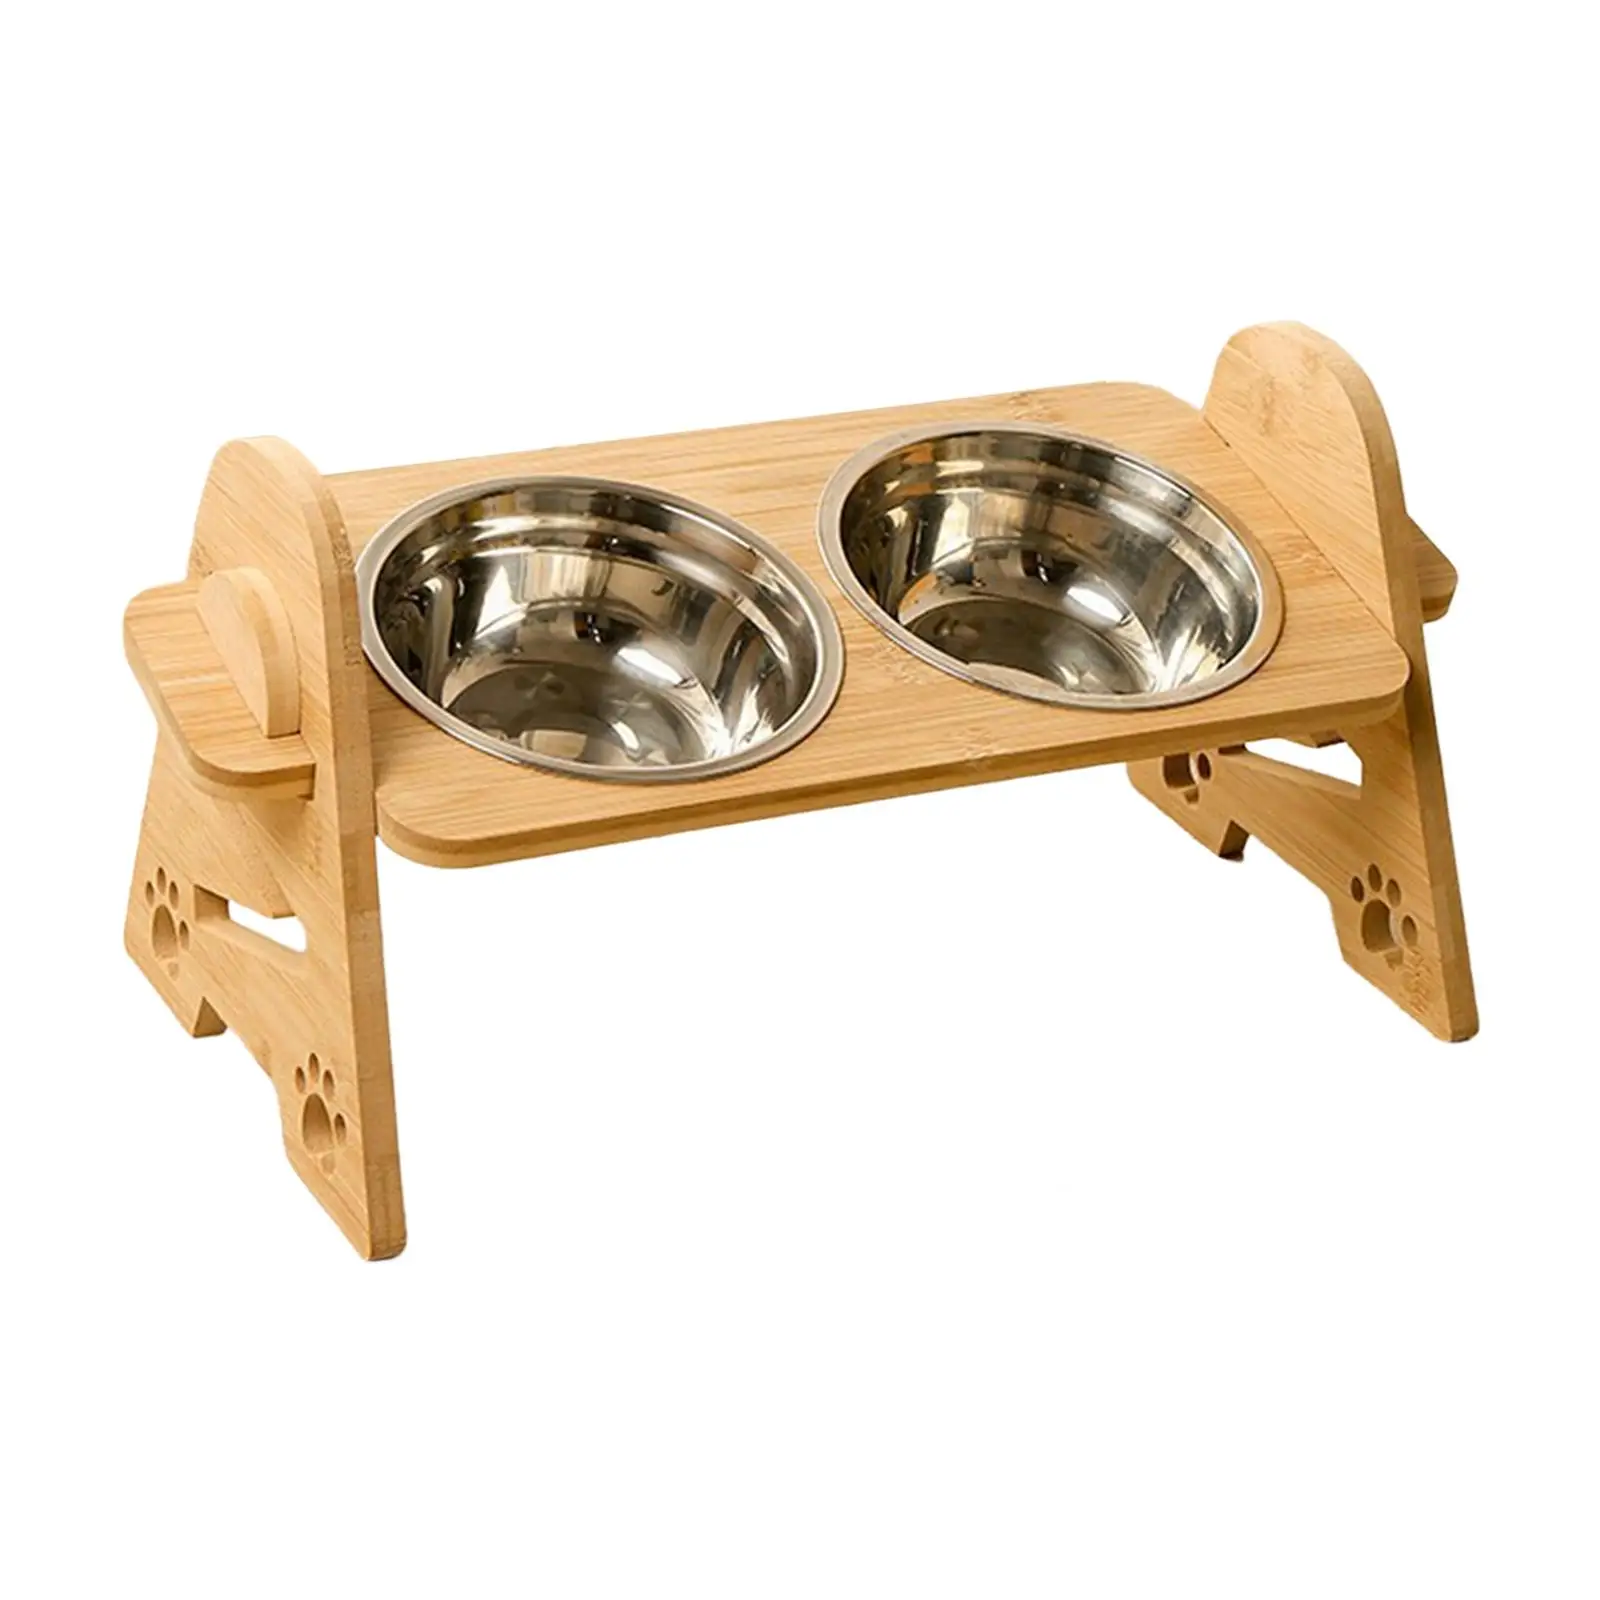 Elevated Dog Bowls Nonslip Water Drinking Bowl Pet Food and Water Bowl Combo